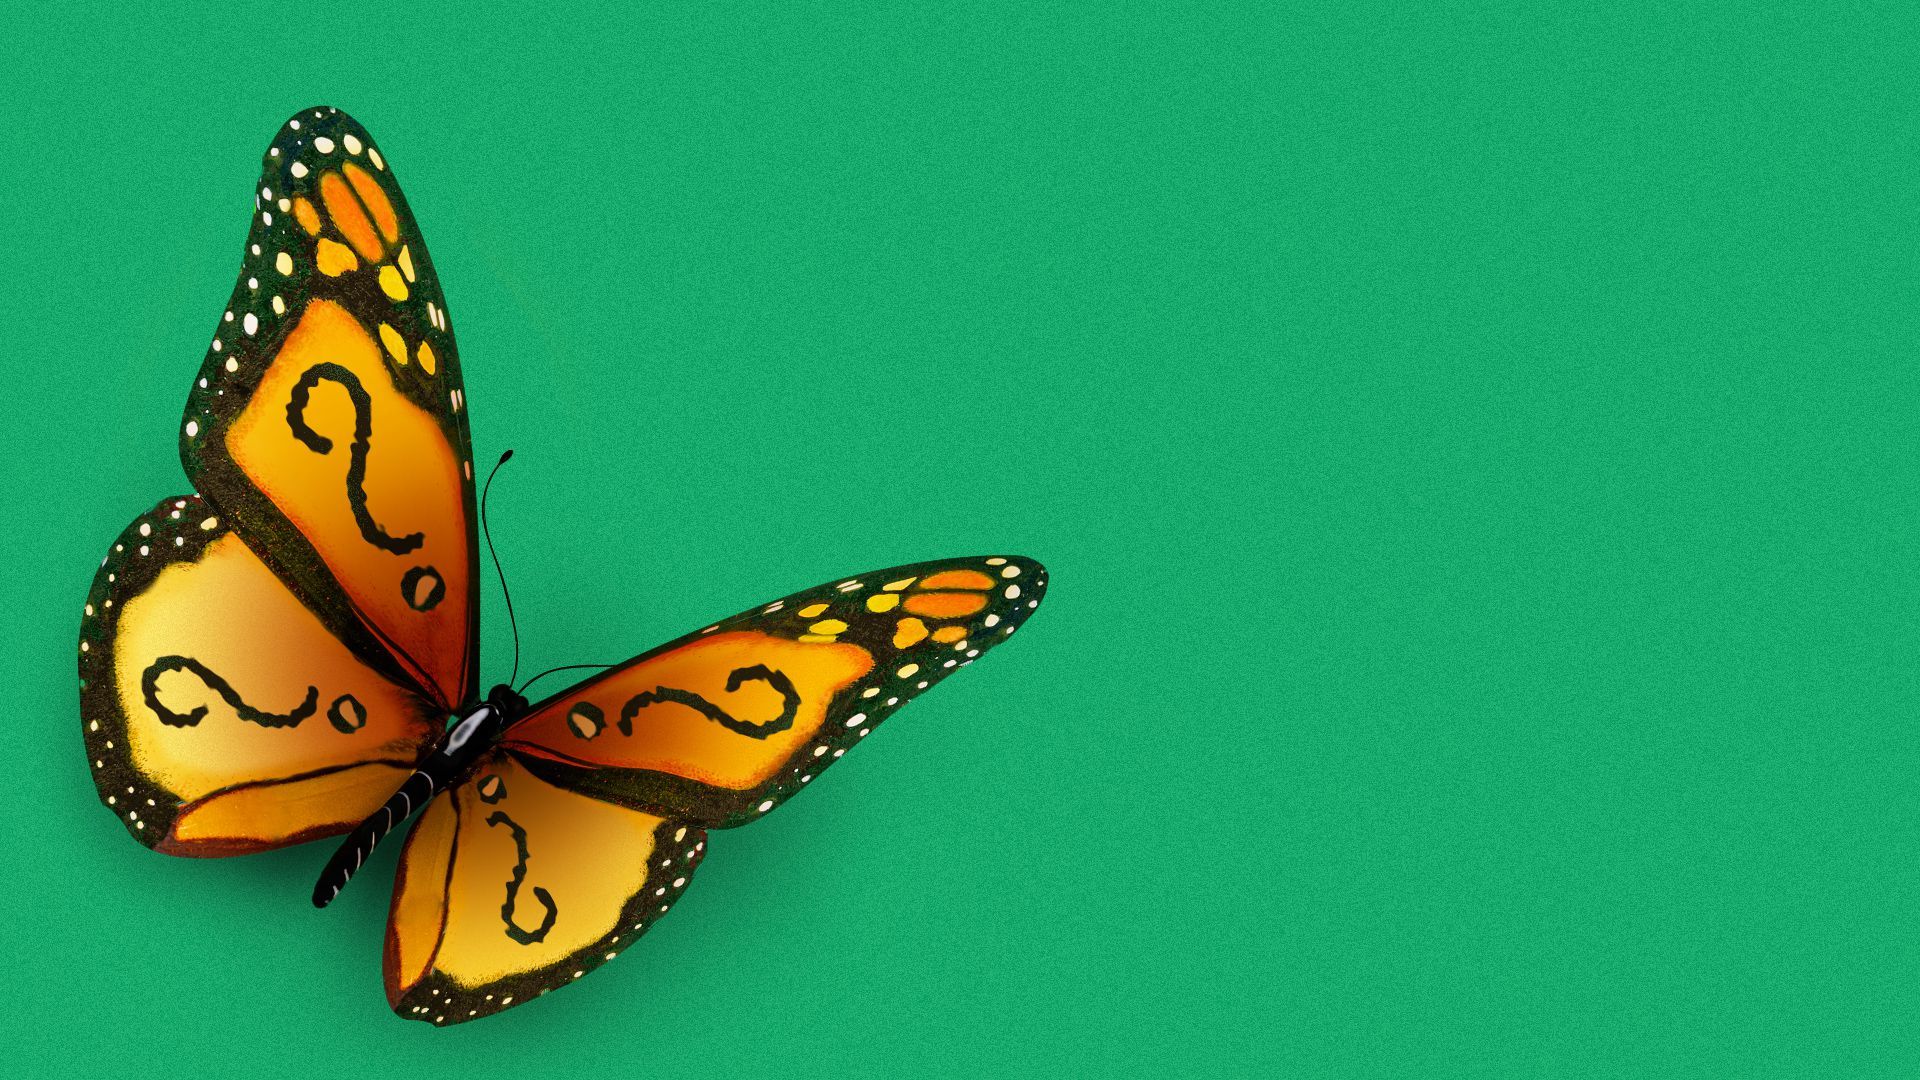 Illustration of a monarch butterfly with a question mark pattern on its wings.   